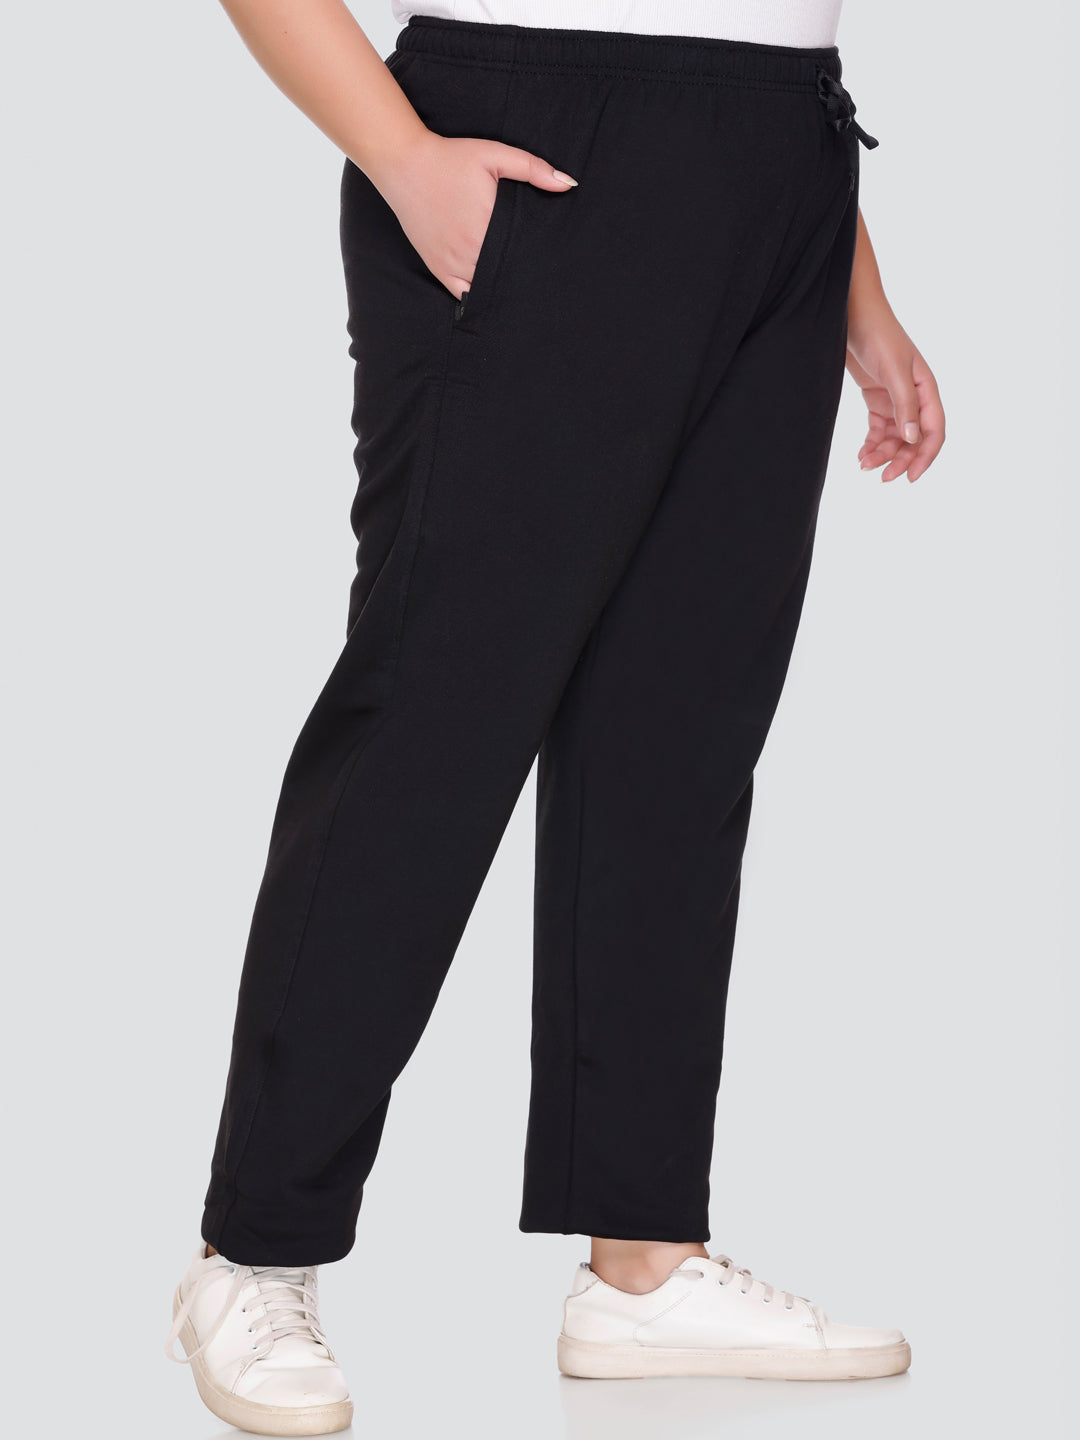 Buy Solid High Waist Lady Trousers Loose Casual Summer Women Pants With  Pockets Customized Tailor Made Bottoms Gift for Her Pleated Pants Online in  India - Etsy